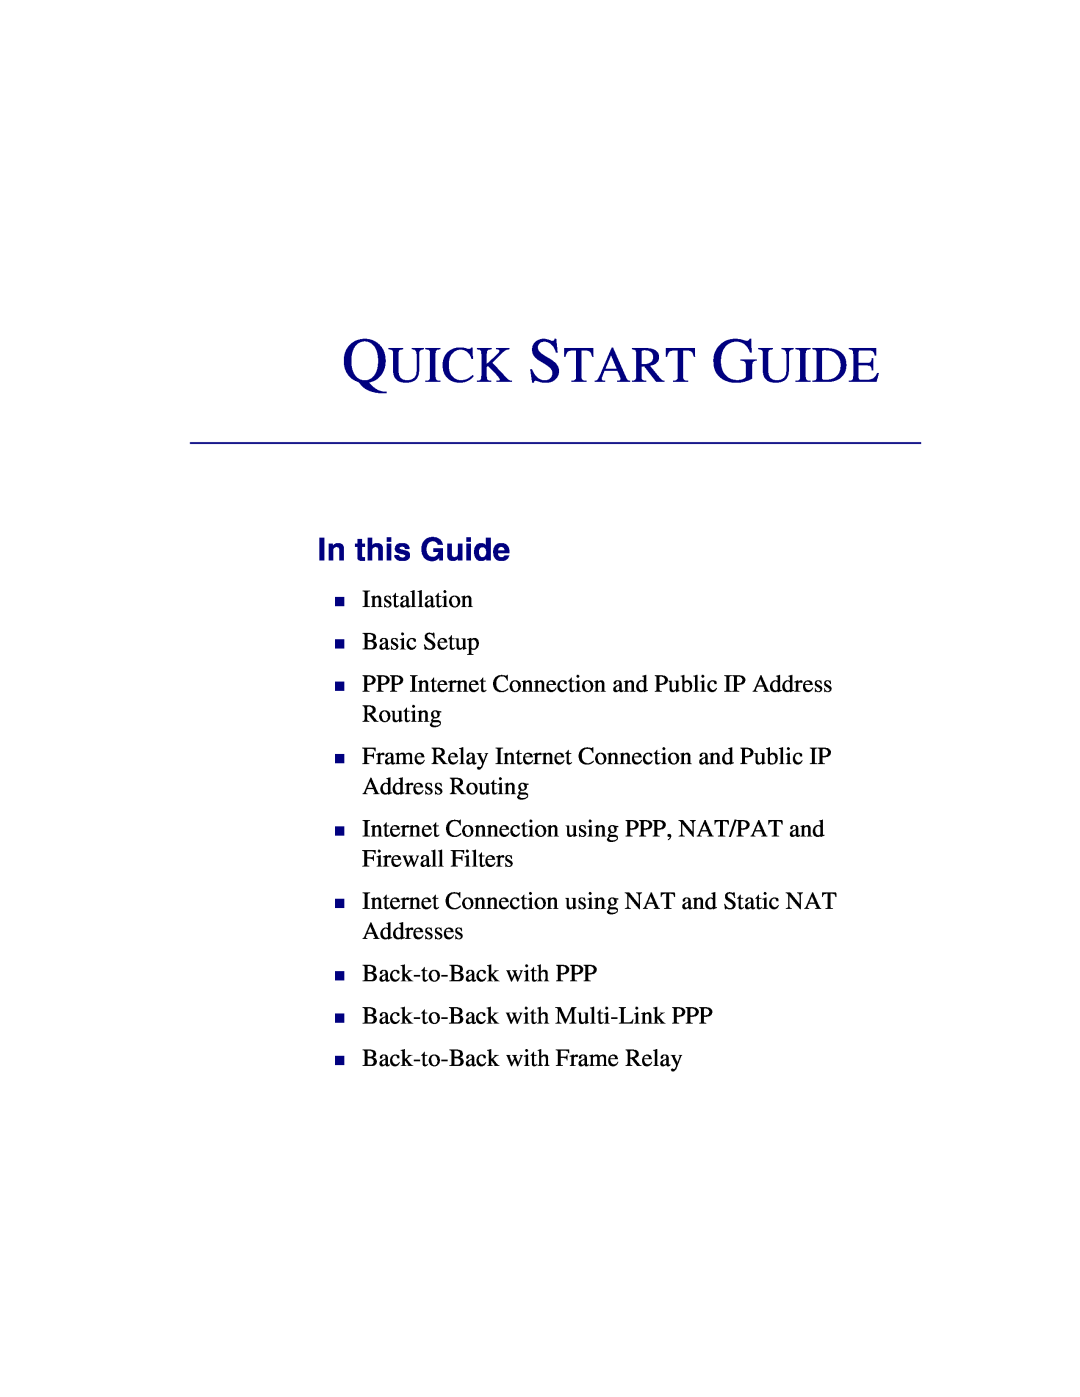 Carrier Access Terminal Server Router quick start Quick Start Guide, In this Guide, ν Installation ν Basic Setup 